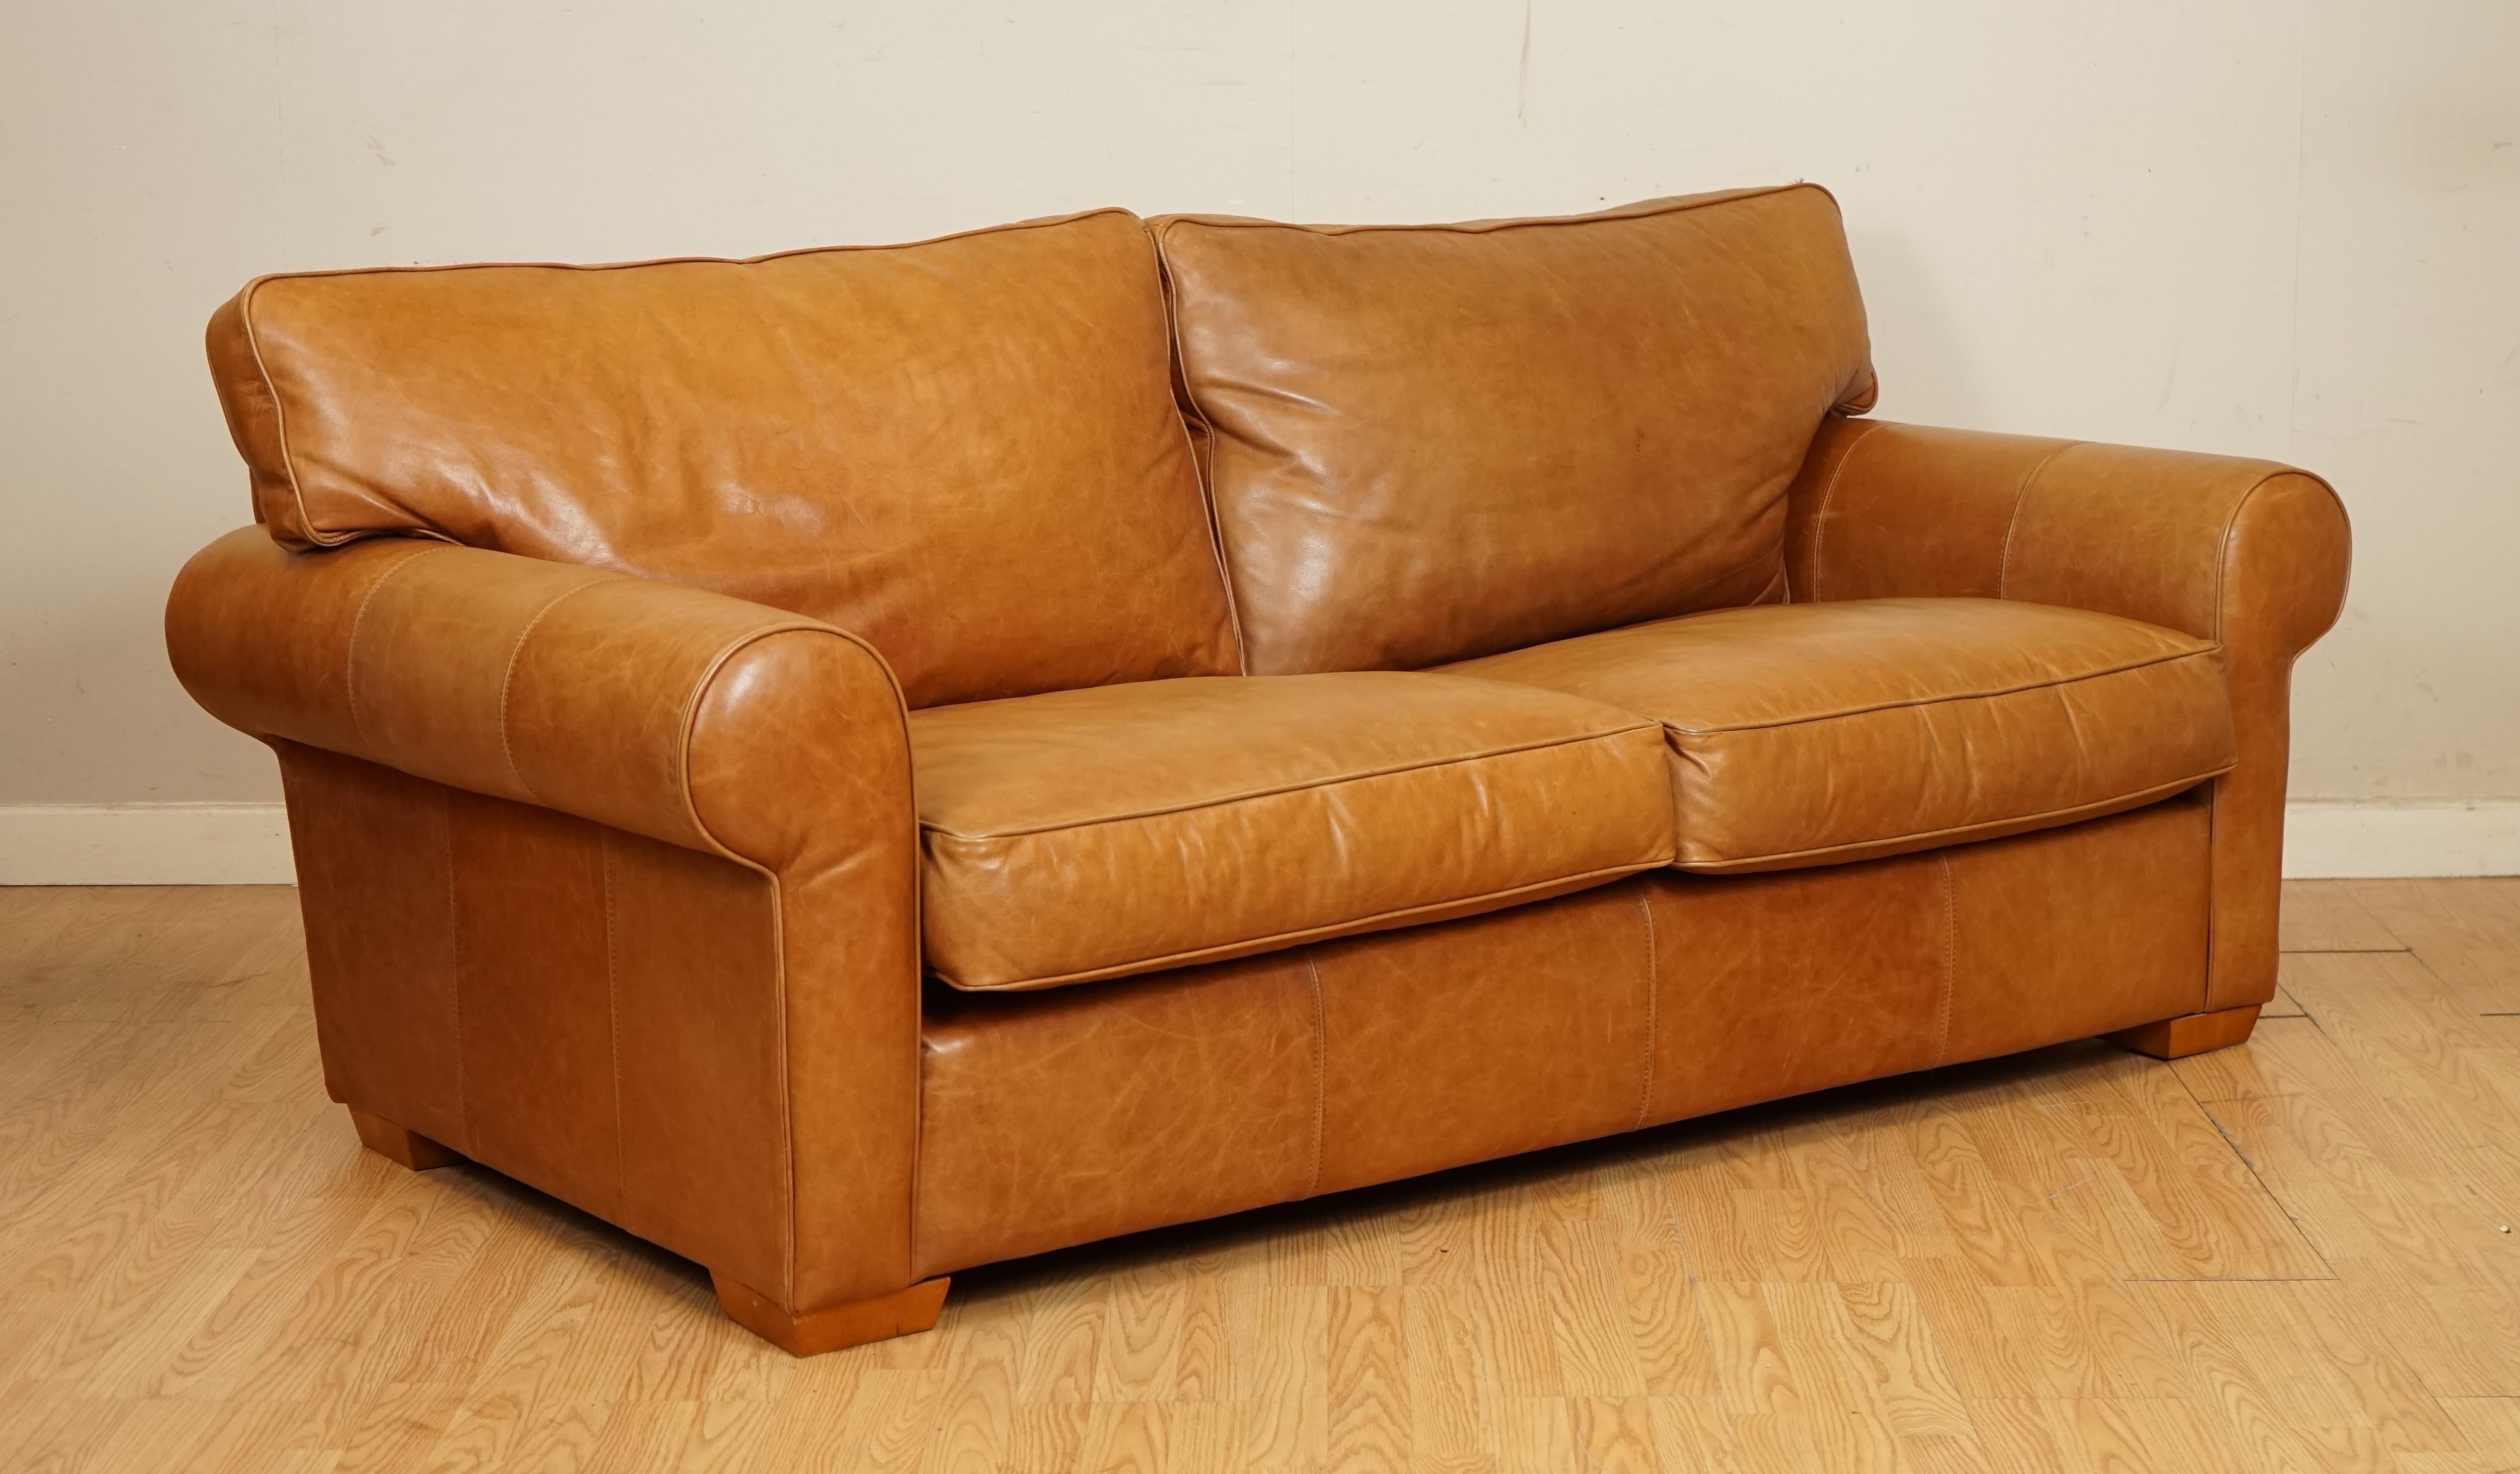 We are so excited to present to you this Tan leather 2 to 3 seater sofa made by Multiyork.

Overall the sofa is in a good condition as you can see from the pictures.

The feel of the leather is amazing and surprisingly soft and smooth.

It has